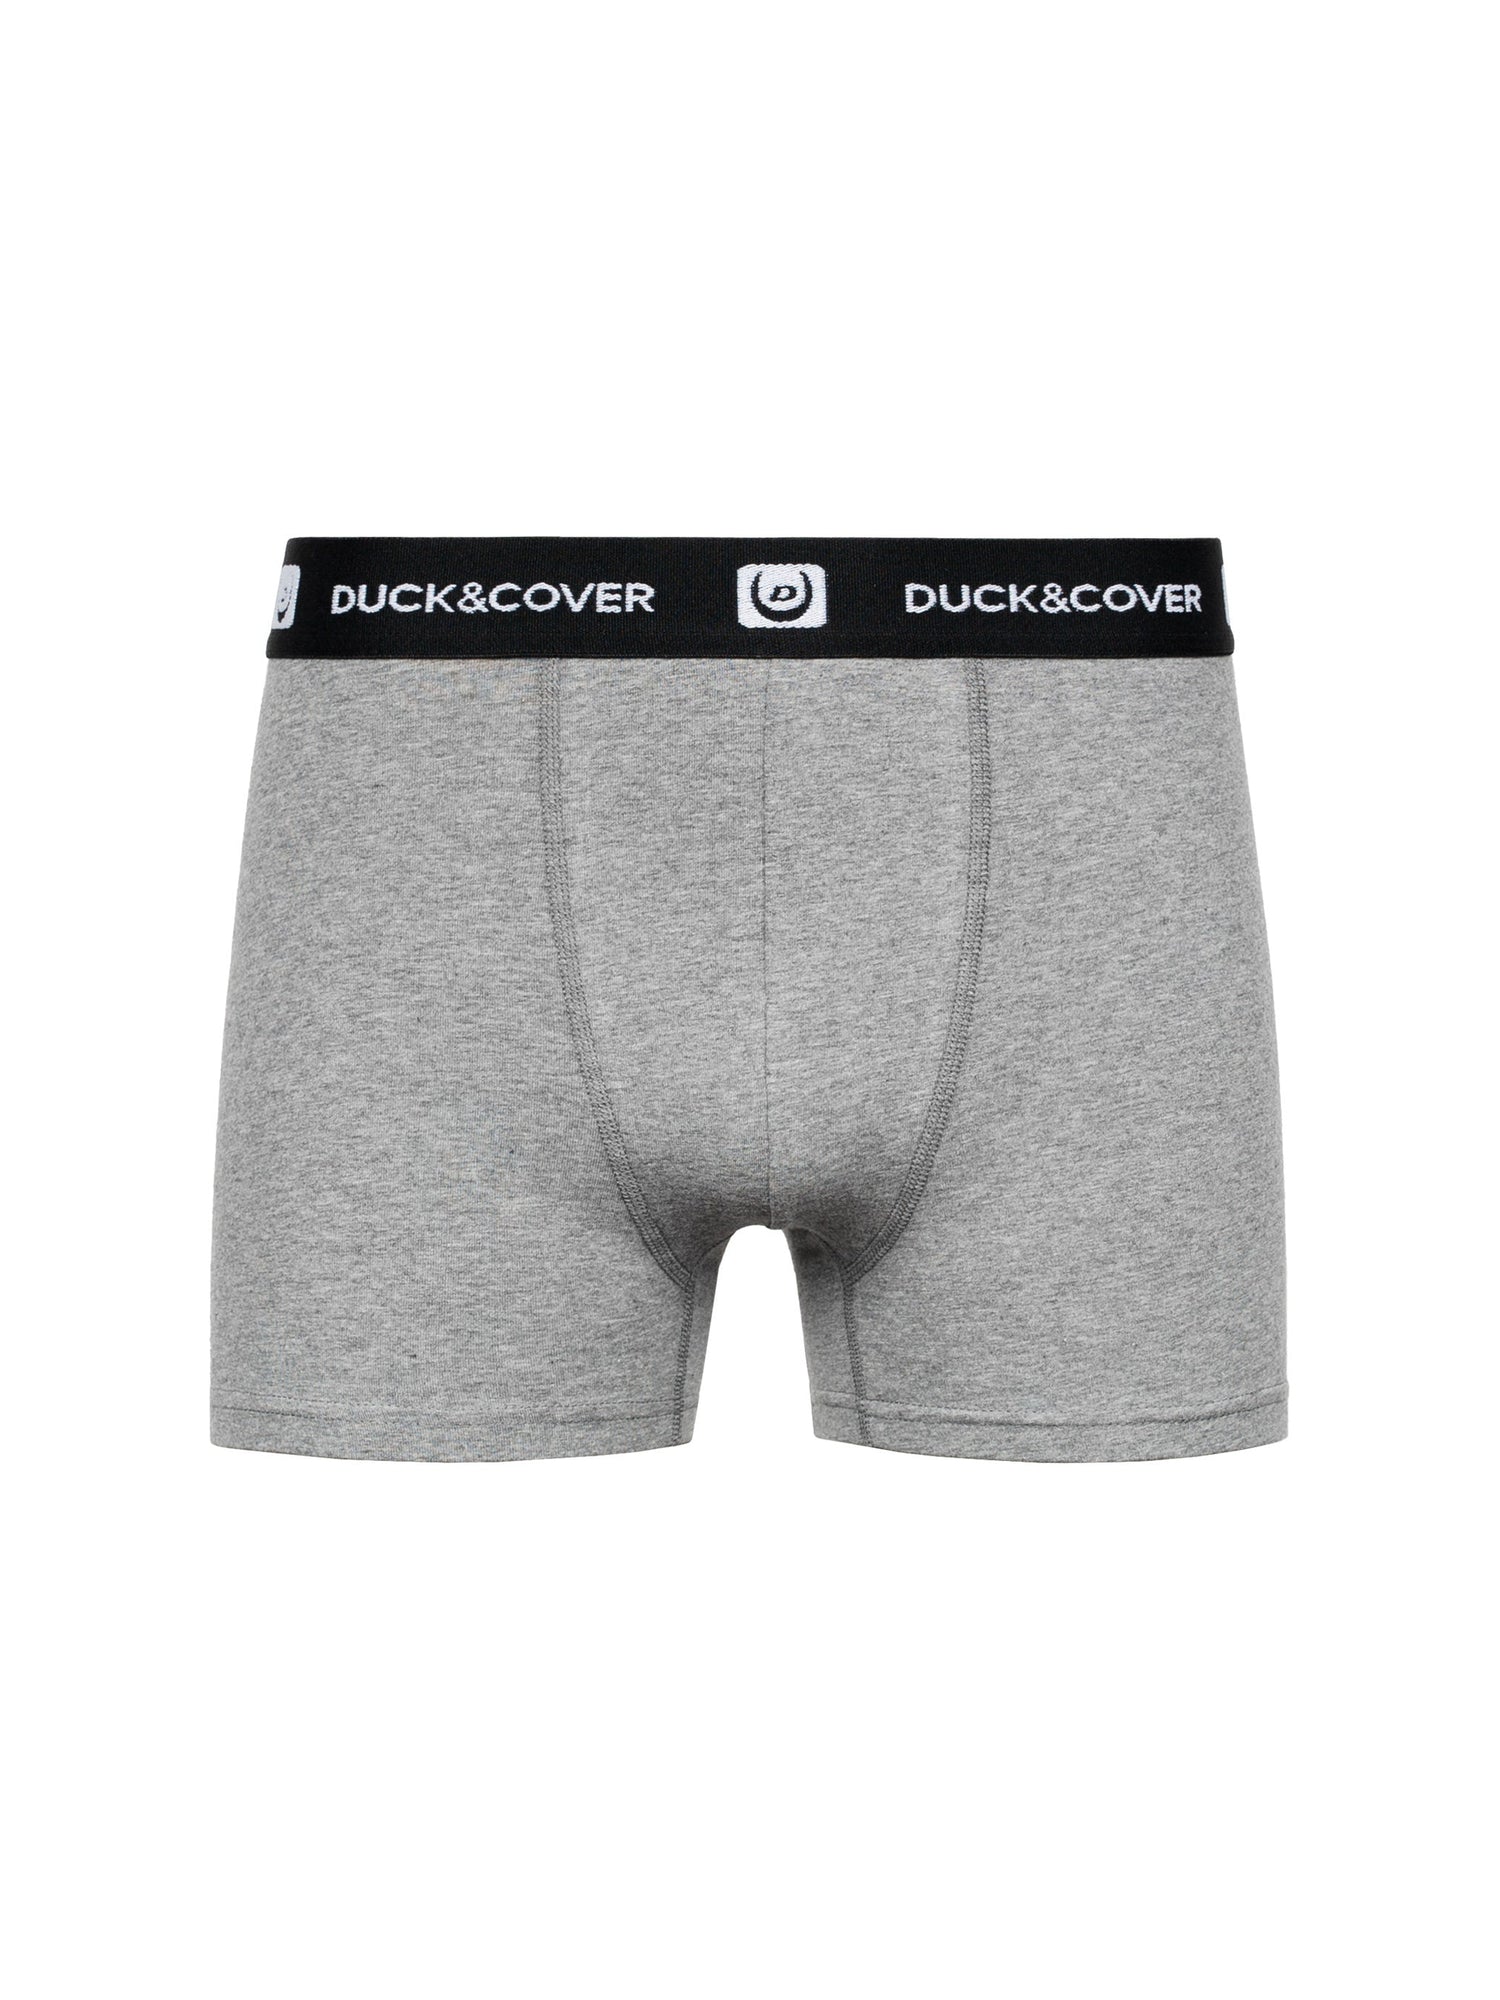 Mens Keach Boxers 3pk Assorted – Duck and Cover